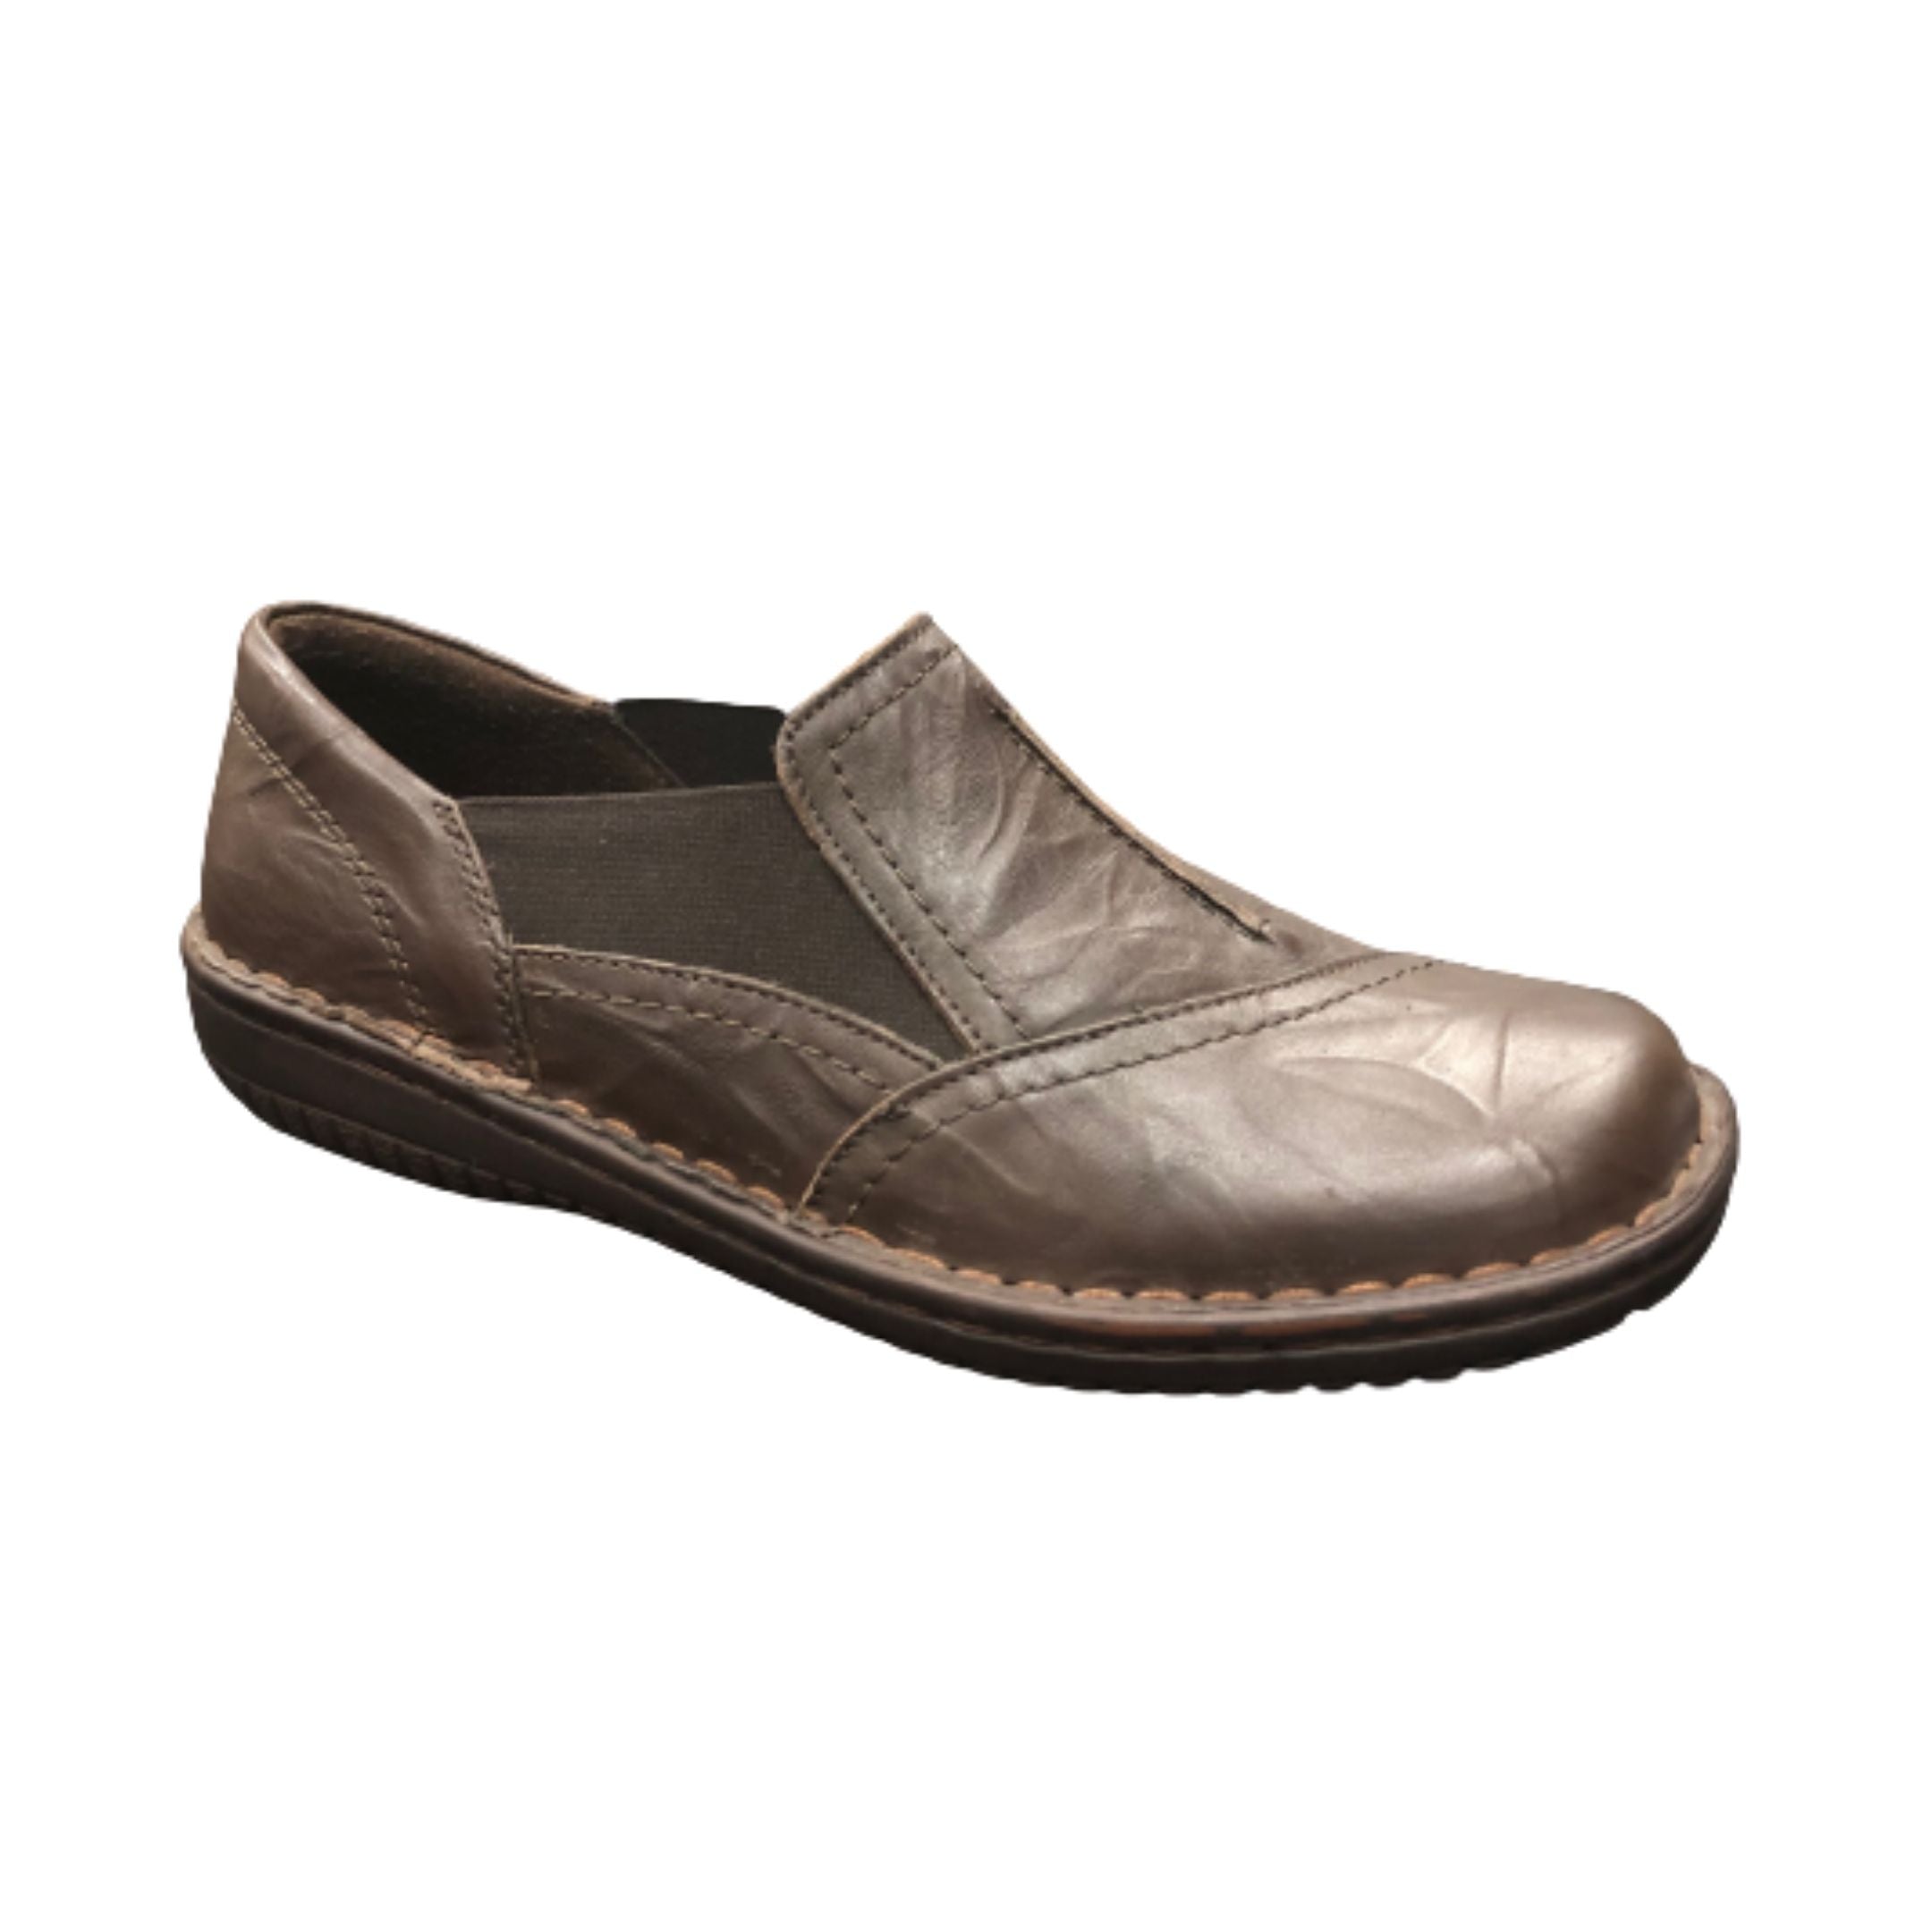 Brown slip on shoe with side elastic and detail stitching with thick stitched outsole